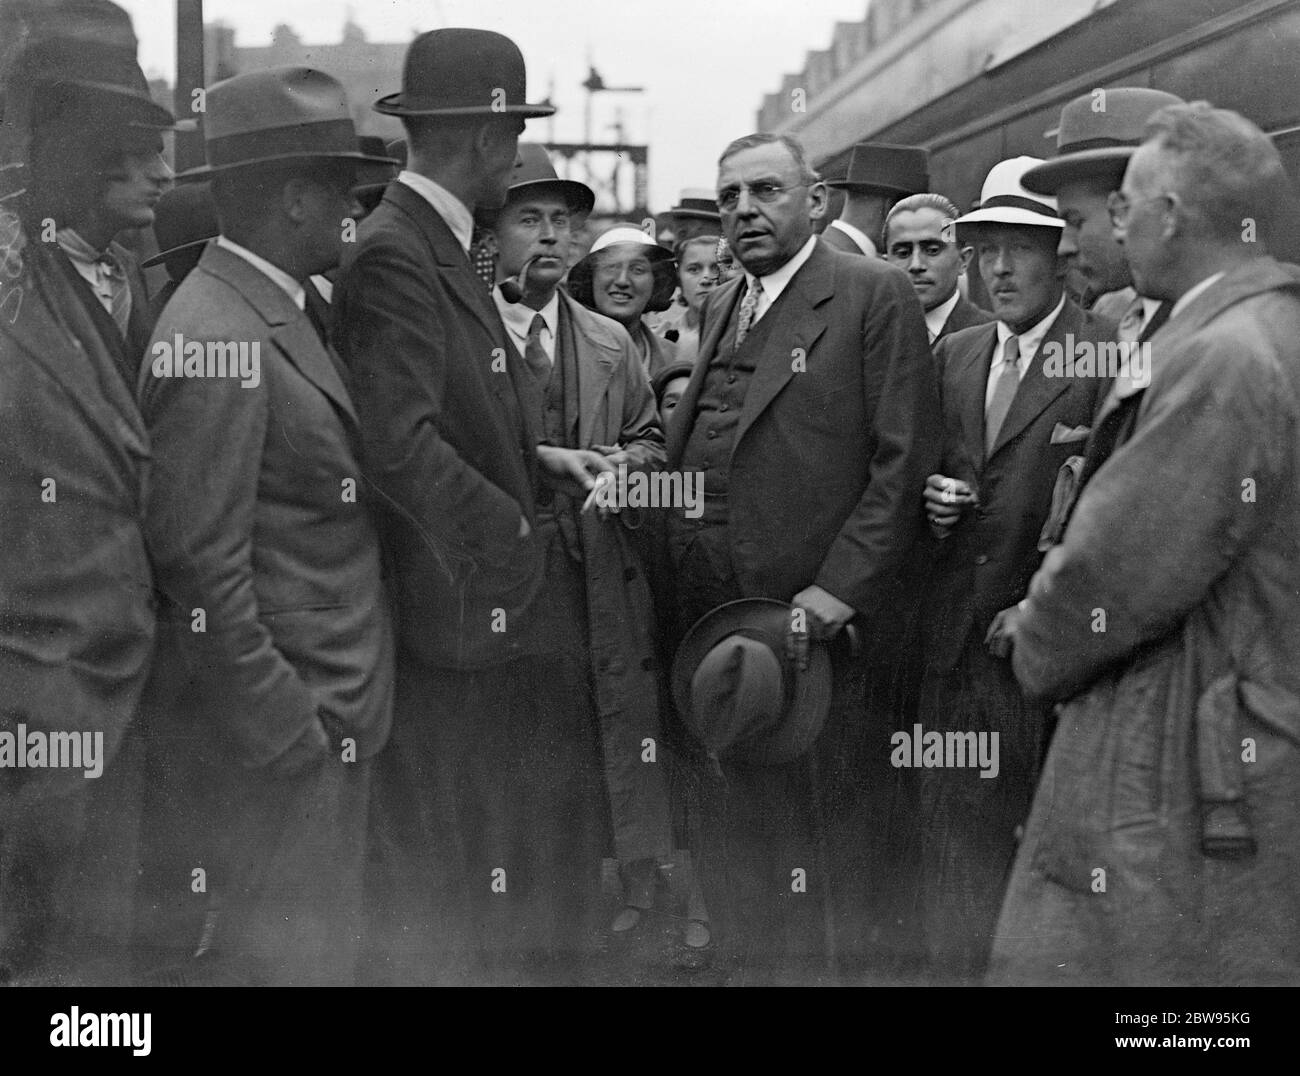 Mayor of Chicago arrives in London on way to Ireland . Mayor Anton Cermak of Chicago who is making a European tour advertising the forthcoming World War Fair in Chicago , arrived in London on his way to Dublin . He will make a prolonged visit to London later . When Mr Cermak became Mayor of Chicago in April this year , he vowed to  clean up  the city in sixty days . He declares that London 's Limehouse , the Eastern section of the city , is as bad as Chicago . Mayor Anton Cermak of Chicago at Victoria station , London , on arrival , surrounded by reporters . 1 September 1932 Stock Photo